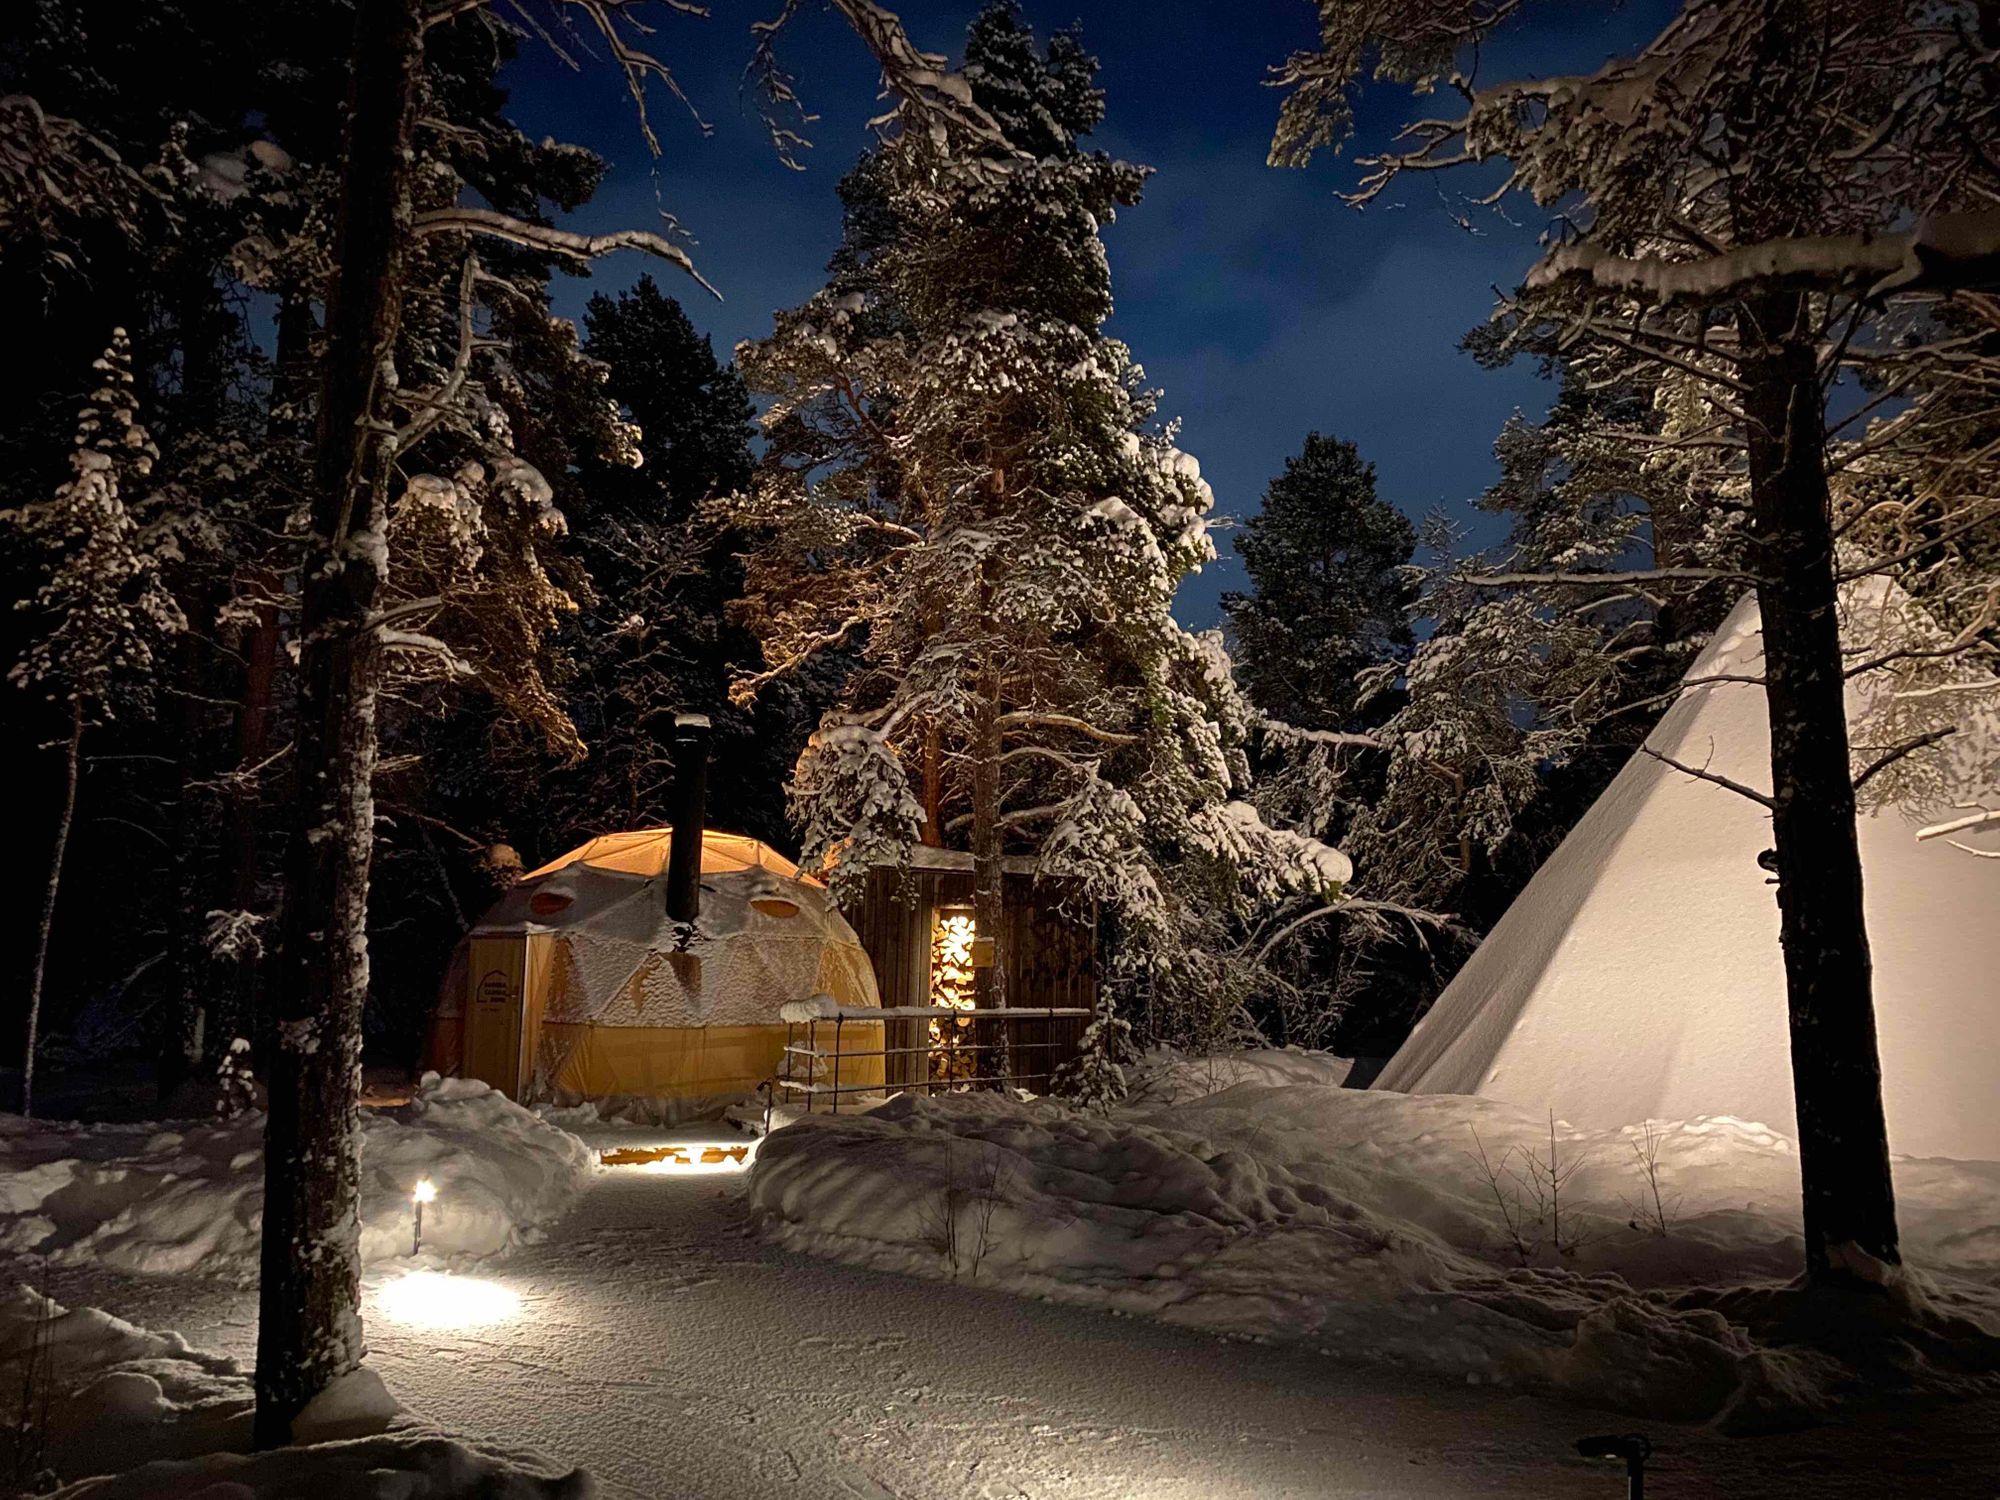 A sleeping dome in a snowy forest in the north of Norway.